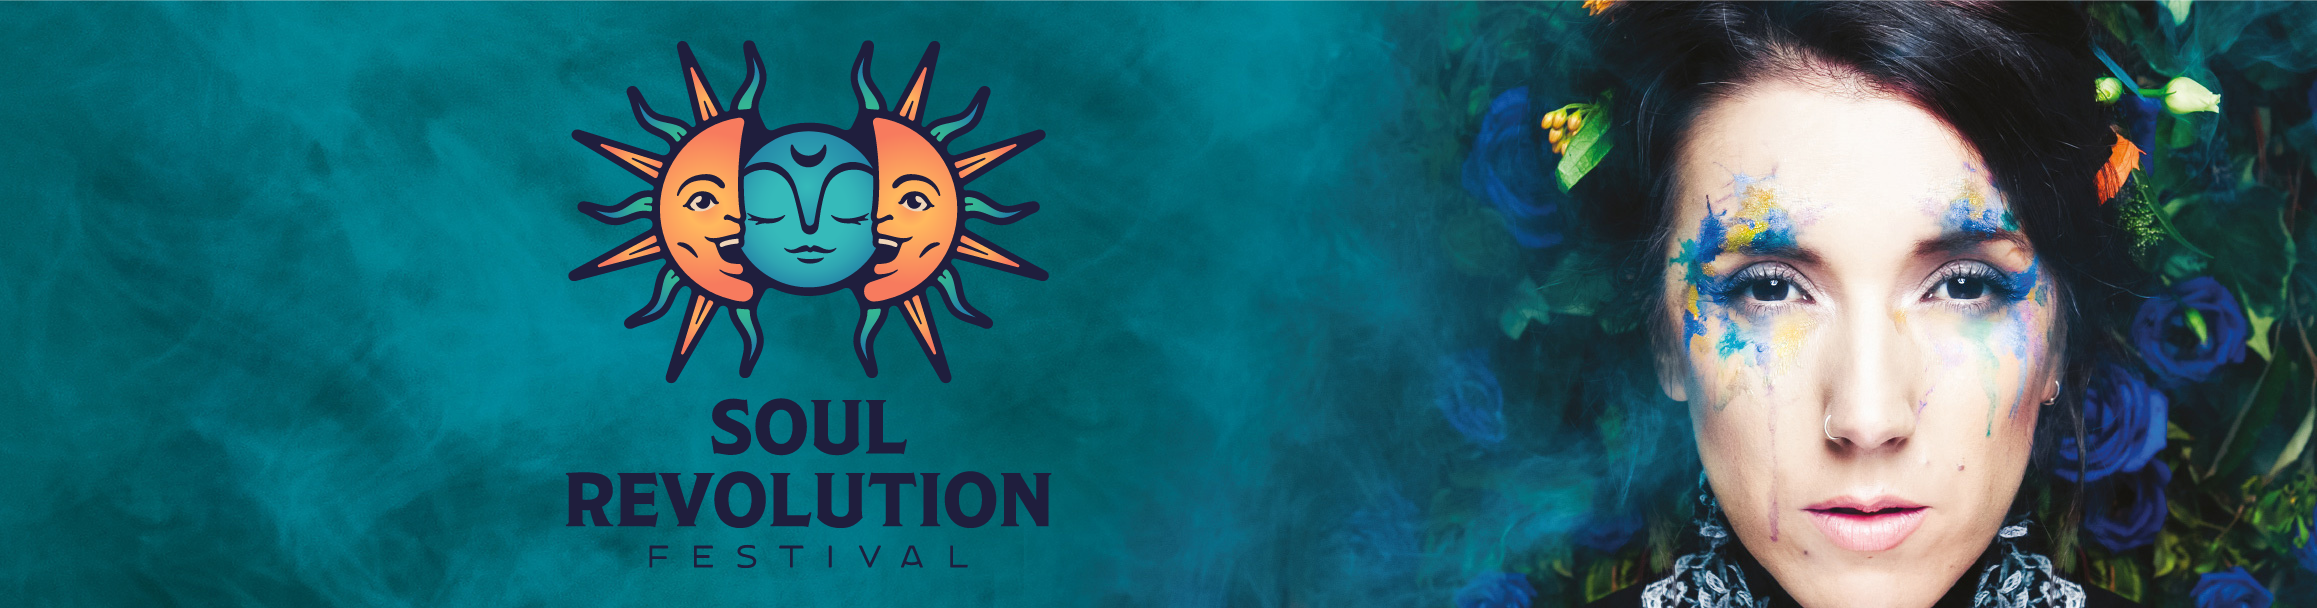 Nessi Gomes adorned with vibrant face paint, poised alongside the Soul Revolution Festival logo, embodying the festival's spirit of artistic and musical fusion.